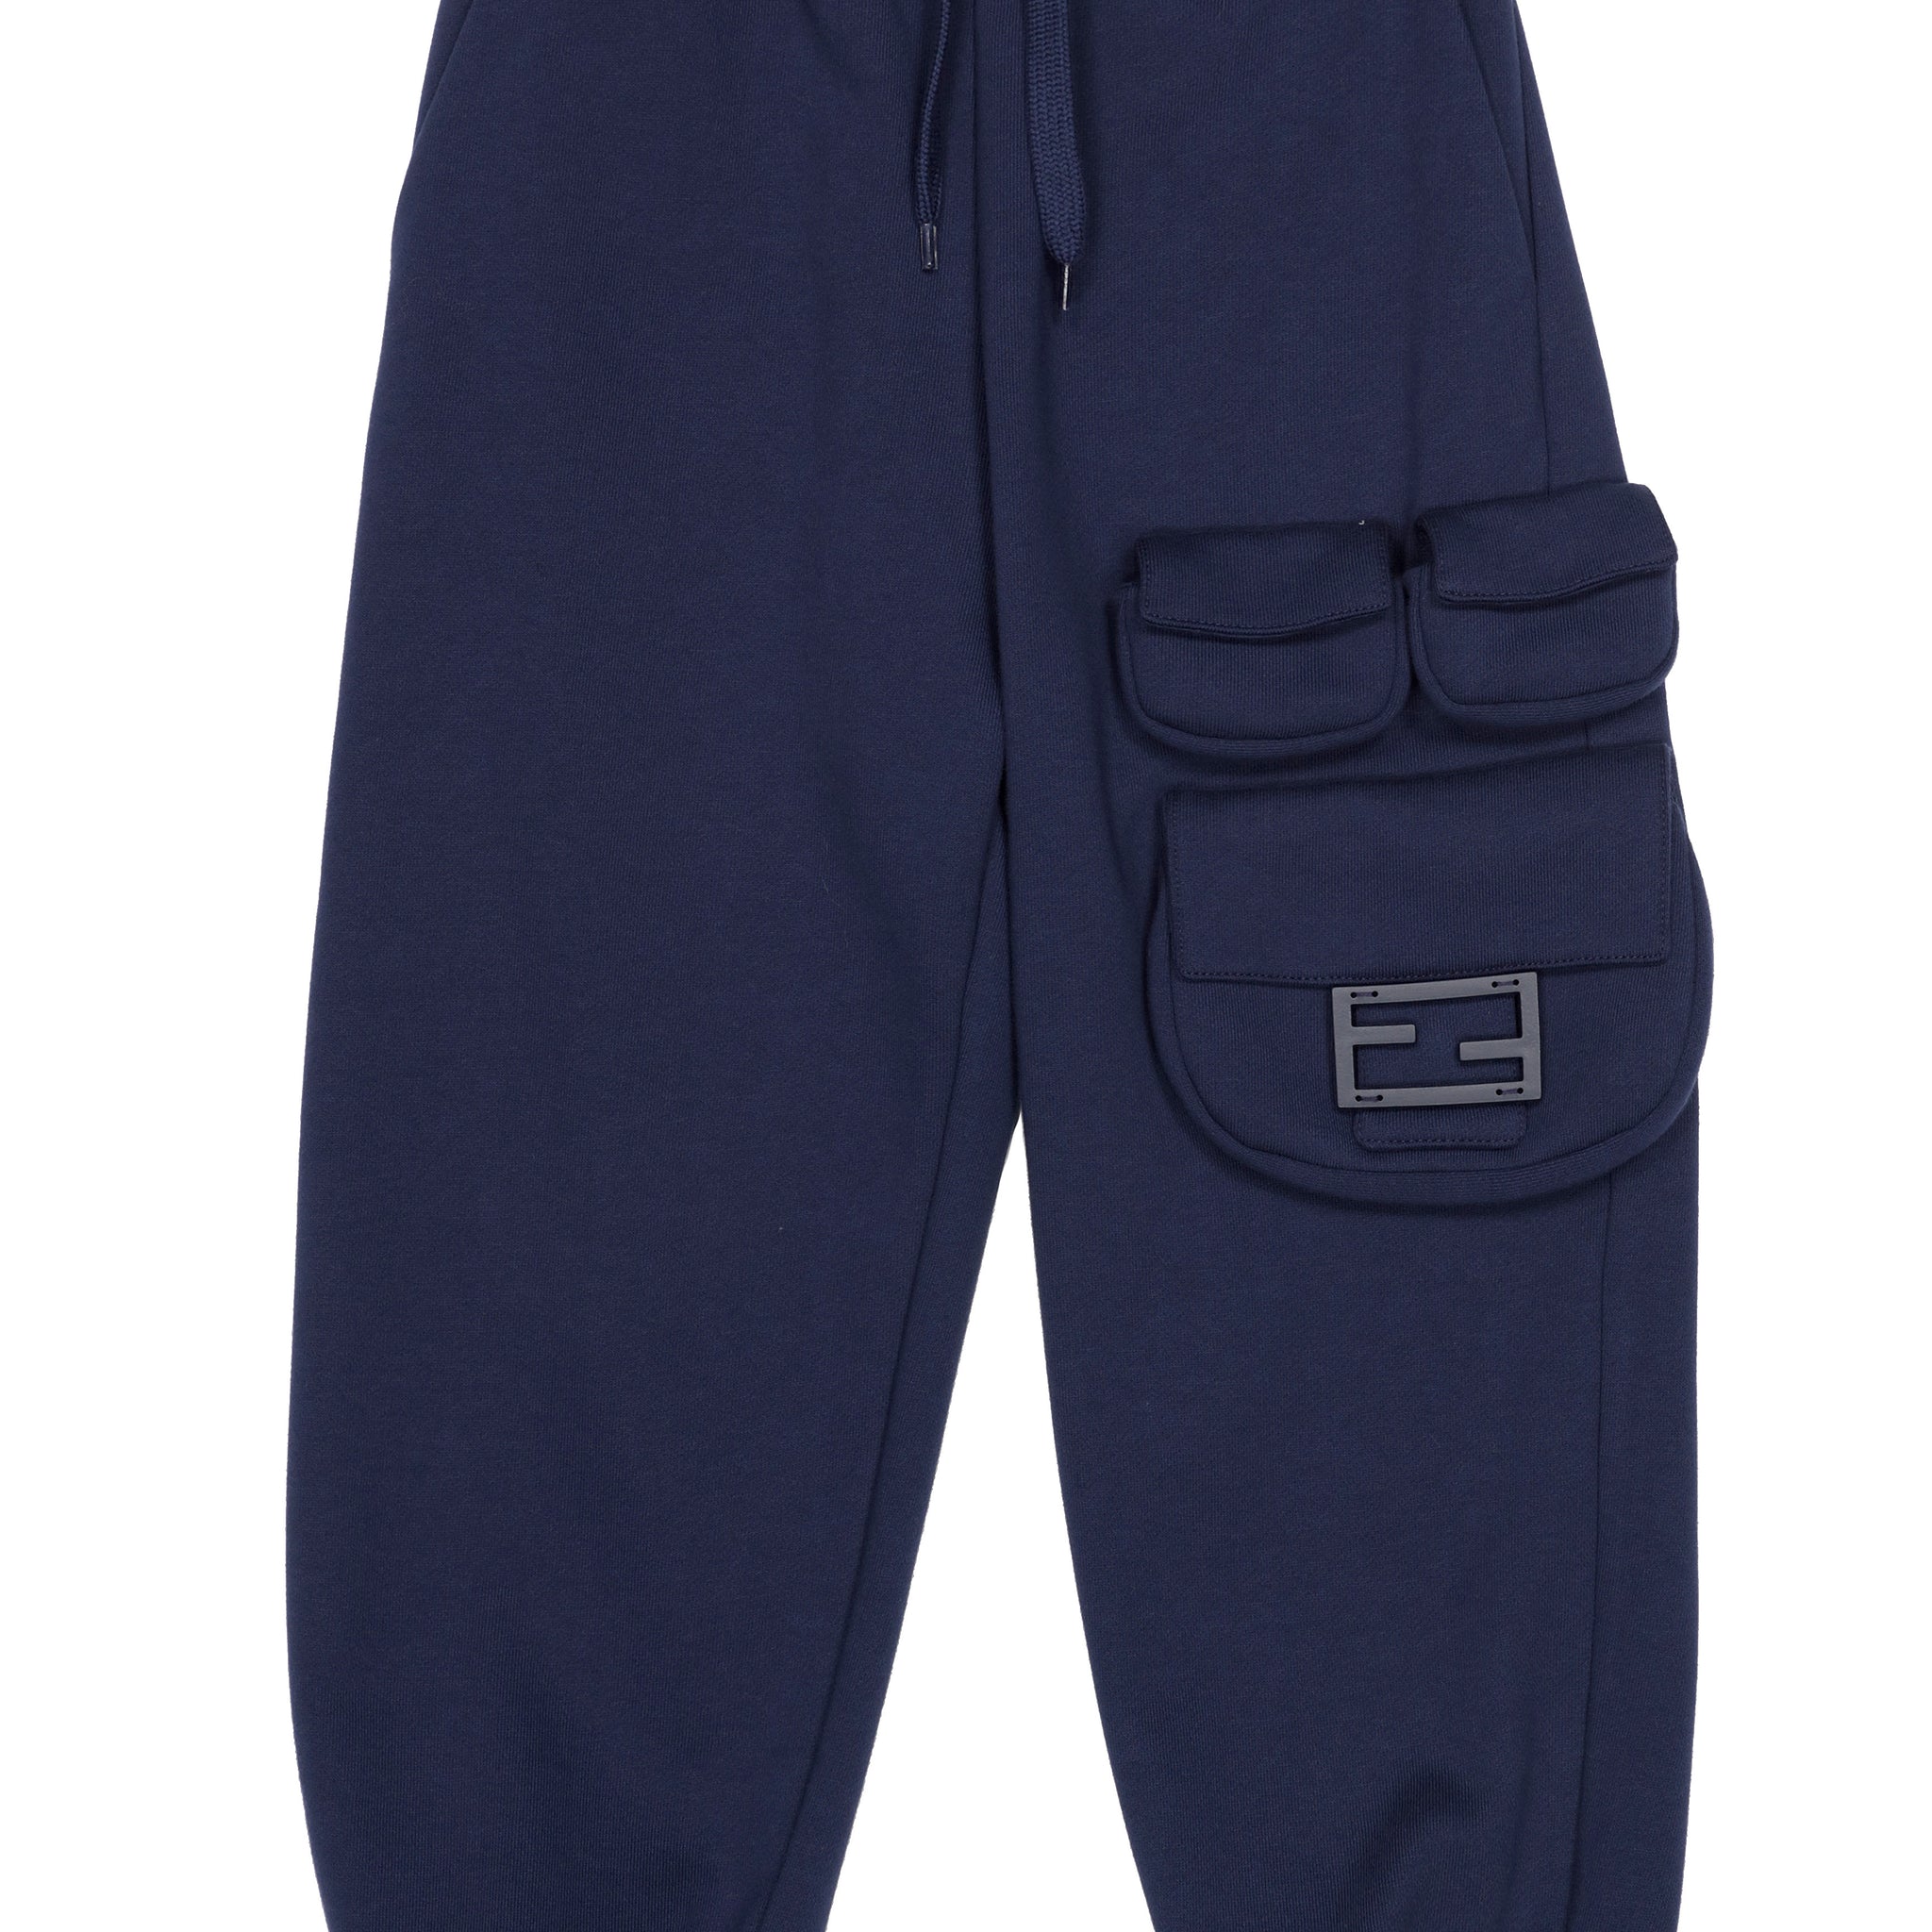 SWEATPANTS WITH 3 POCKETS